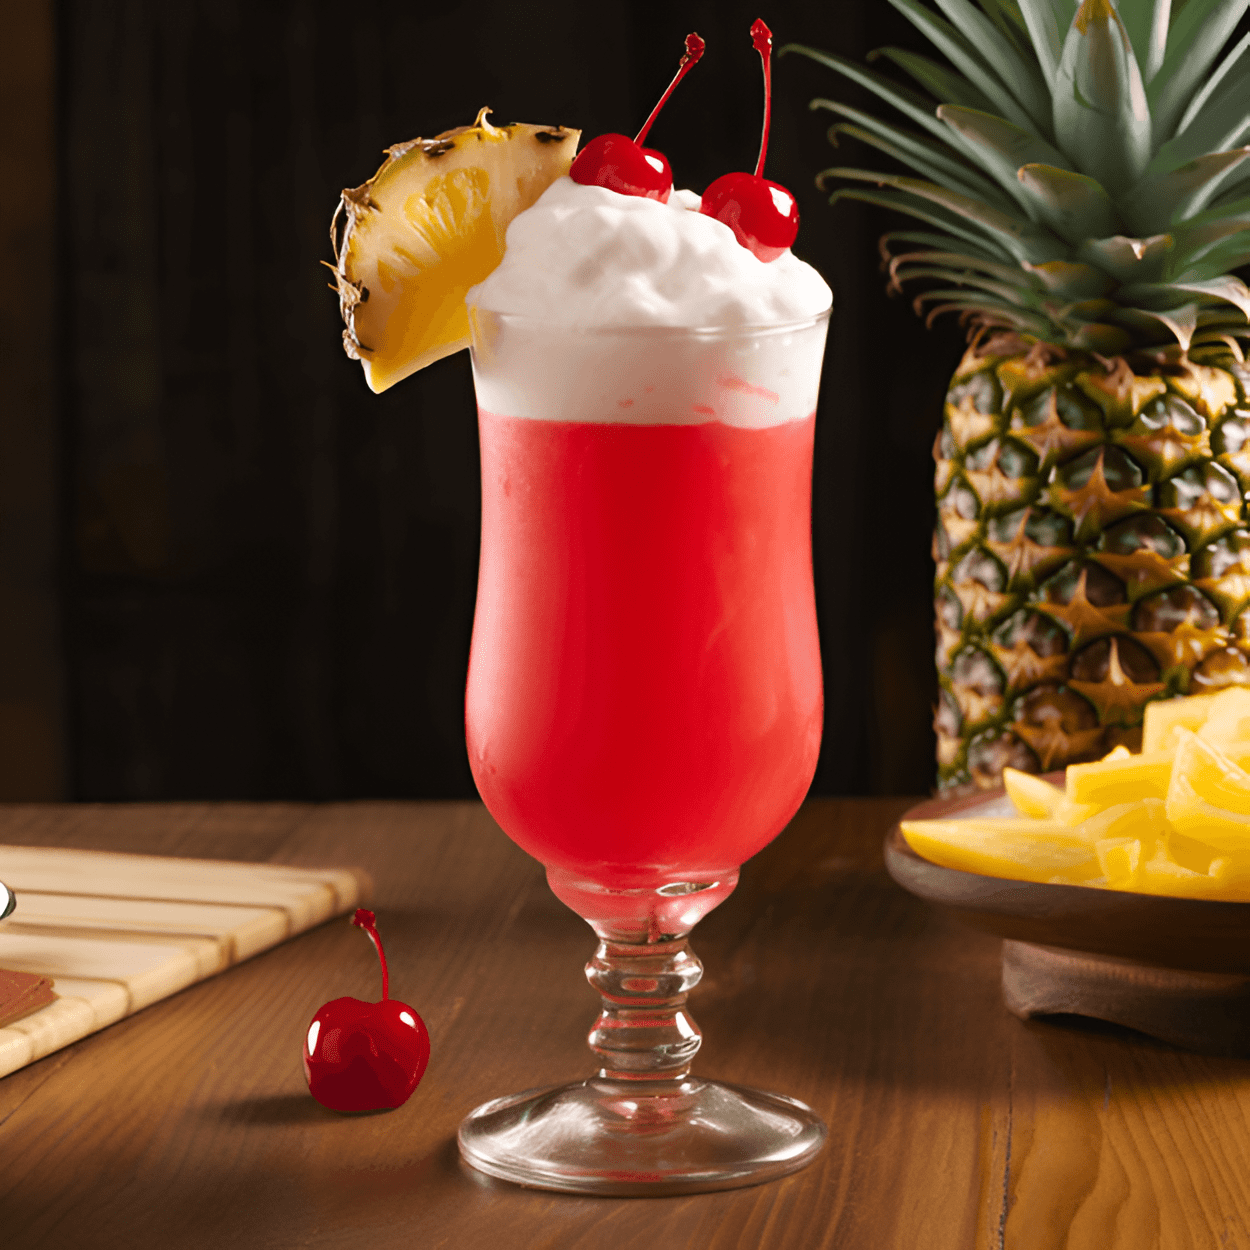 Miami Vice Frozen Cocktail Recipe - The Miami Vice cocktail is a sweet, creamy, and fruity drink. The strawberry daiquiri brings a tangy, sweet and slightly sour flavor, while the piña colada adds a creamy, tropical and coconutty taste. The combination results in a drink that's refreshing, indulgent, and perfectly balanced.